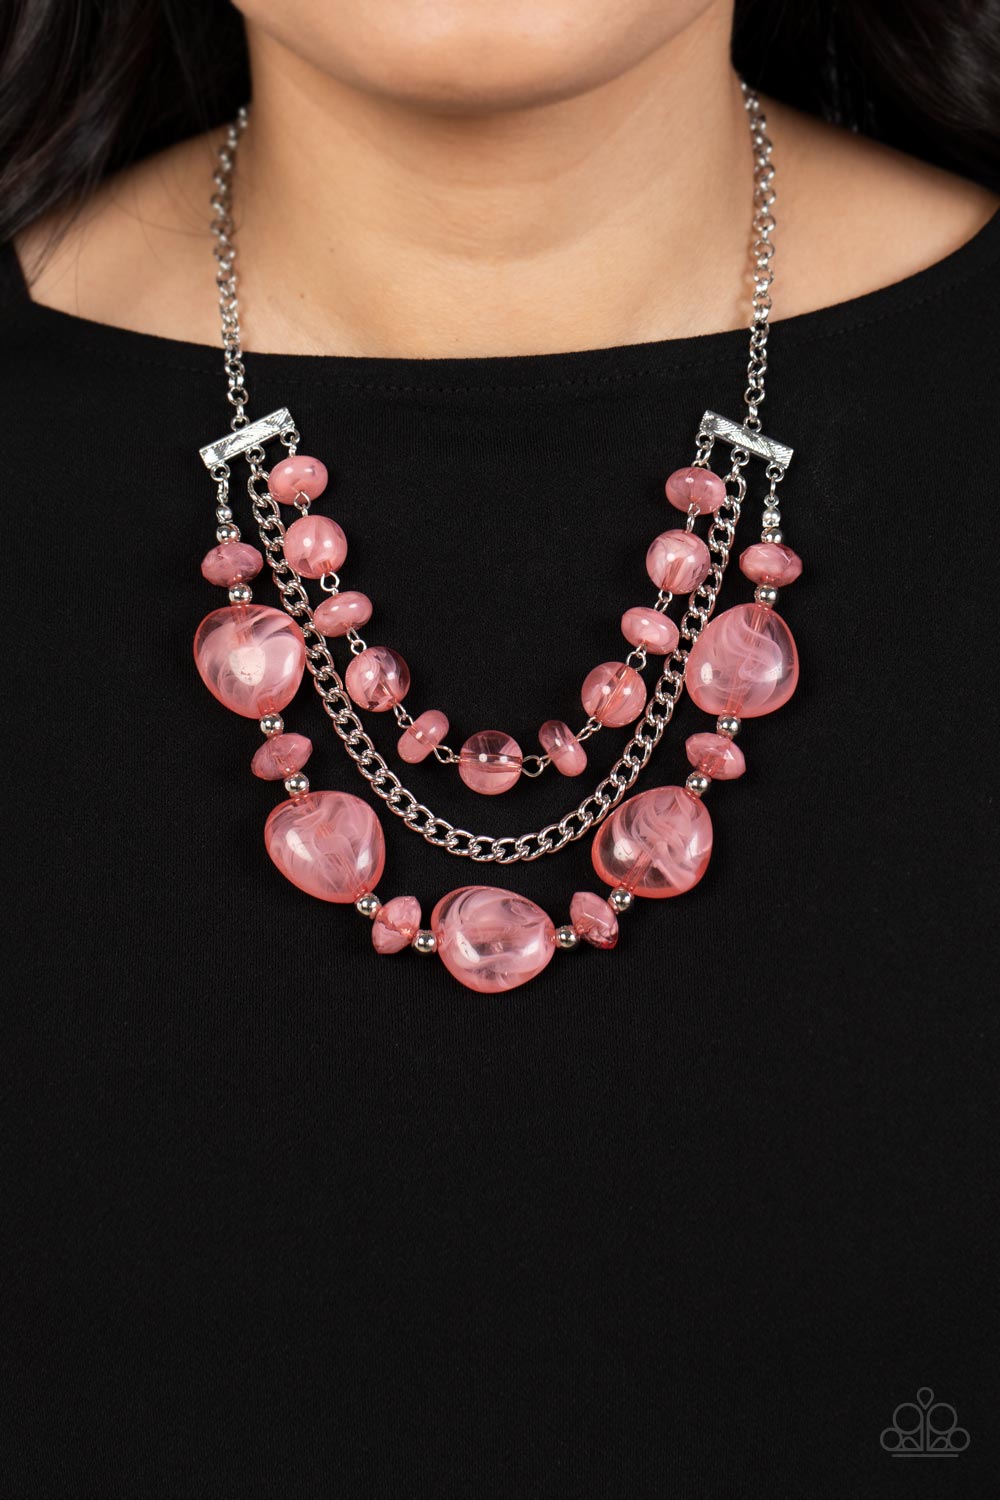 Oceanside Service - pink - Paparazzi necklace